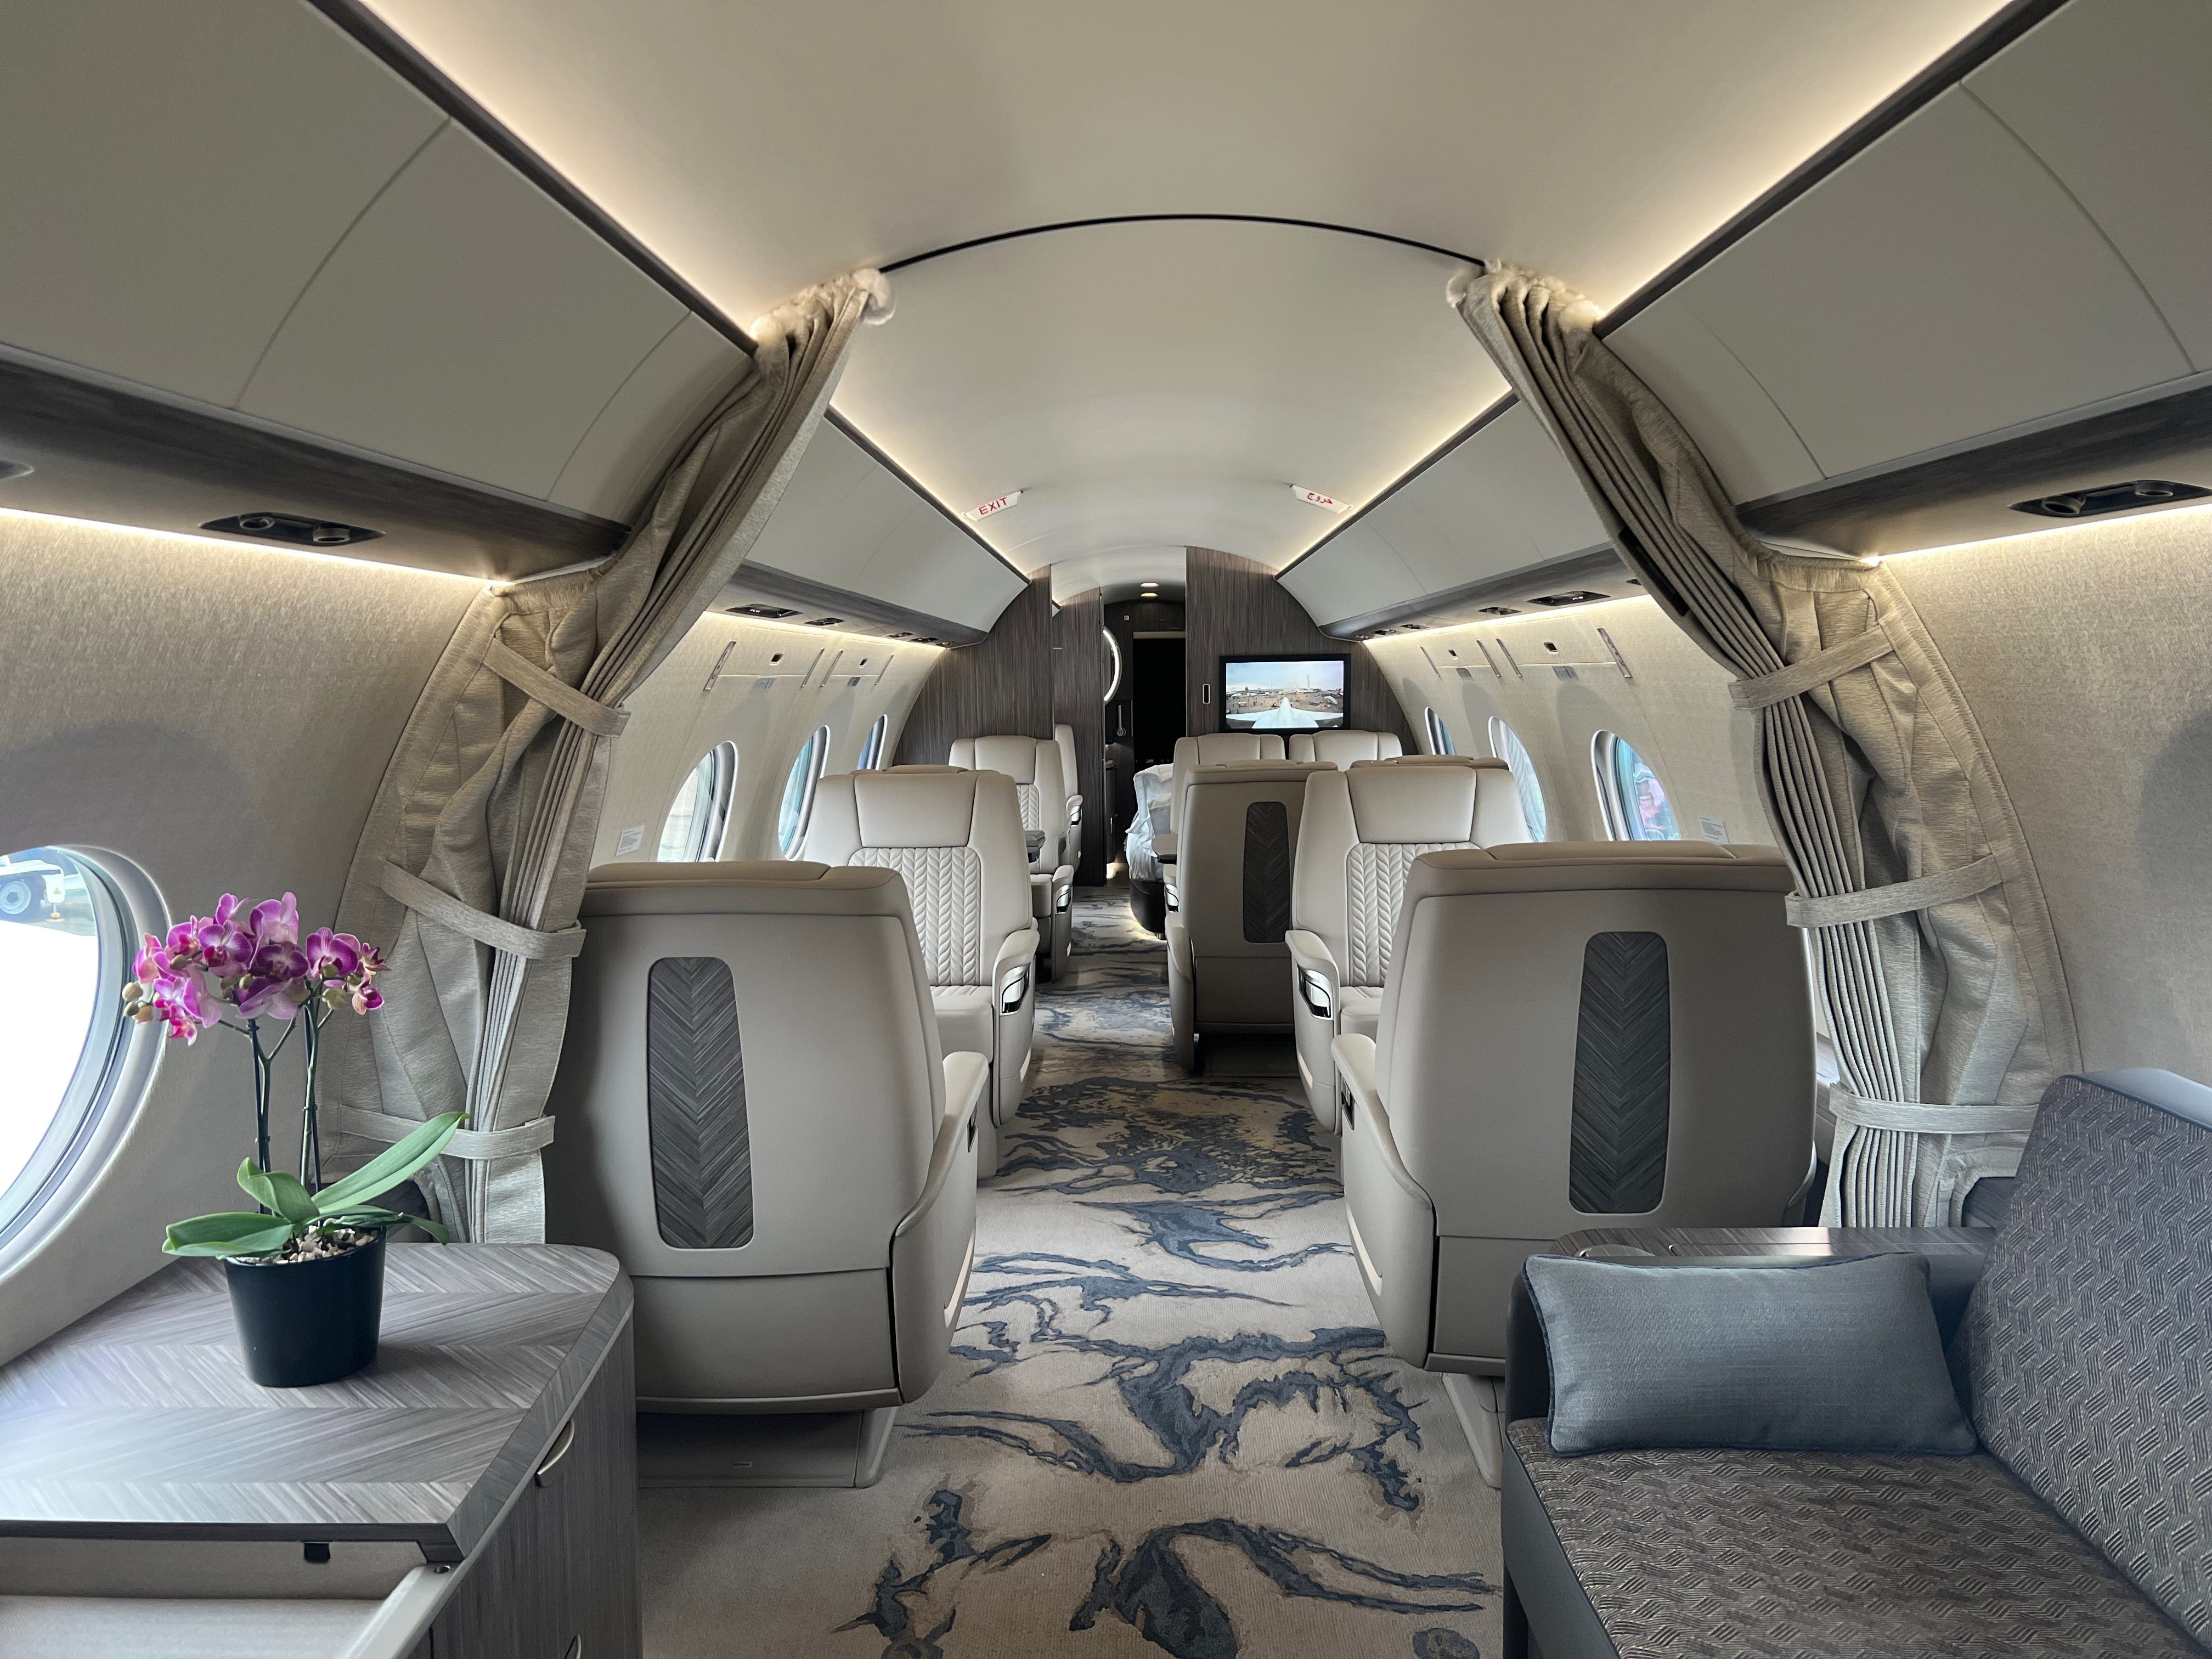 Qatar Airways has received the world's first $81 million Gulfstream G700 private jet as it caters to elite customers — take a look inside